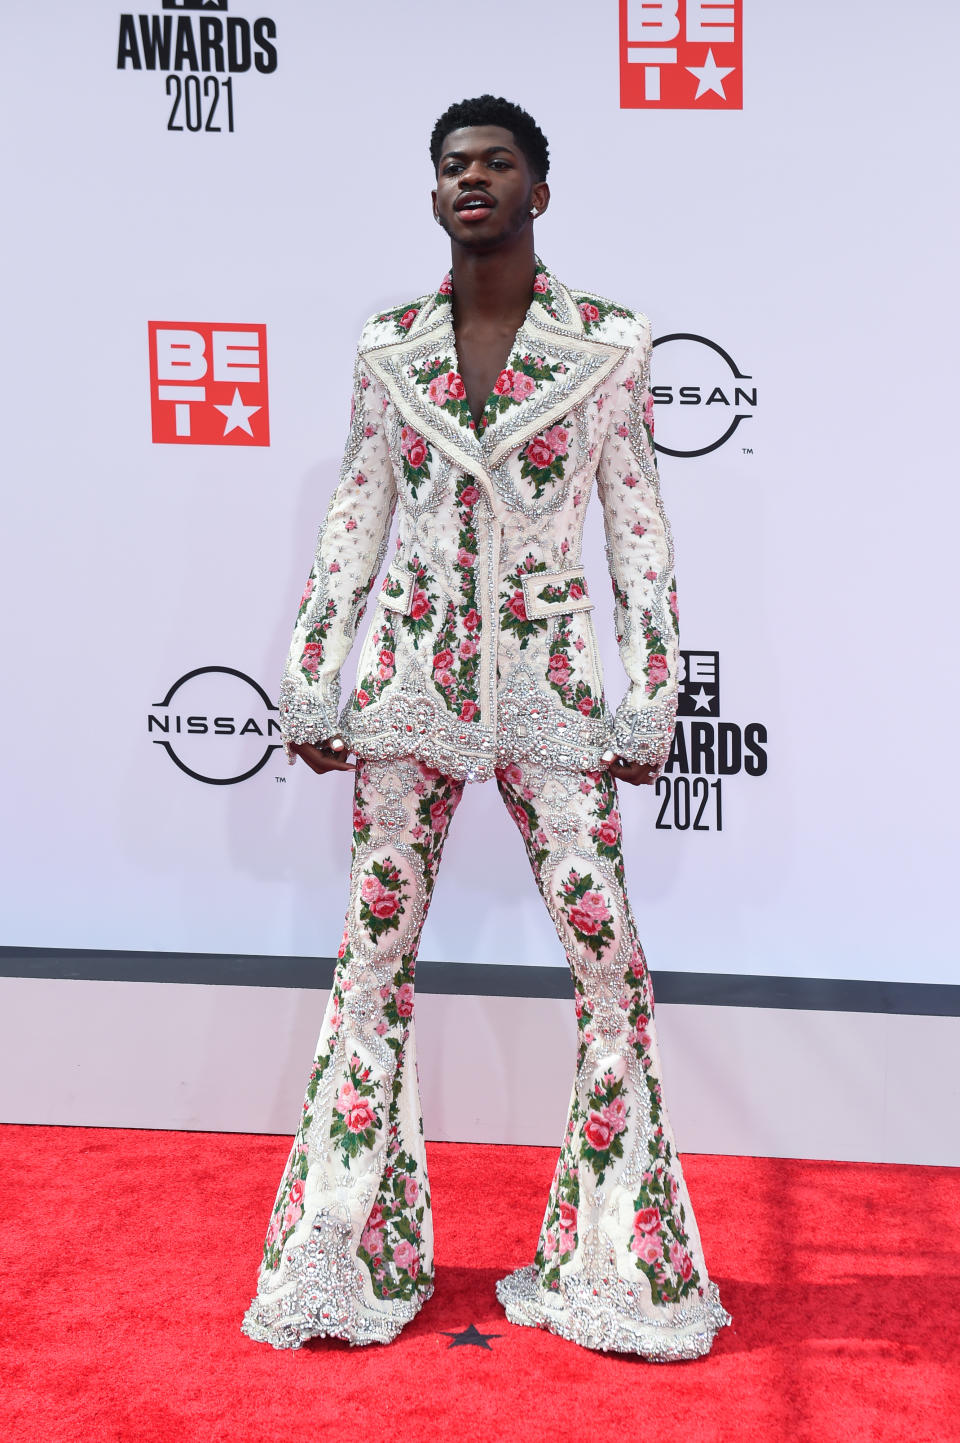 LOS ANGELES, CALIFORNIA - JUNE 27: Recording Lil Nas X attends the 2021 BET Awards at the Microsoft Theater on June 27, 2021 in Los Angeles, California. (Photo by Aaron J. Thornton/Getty Images)